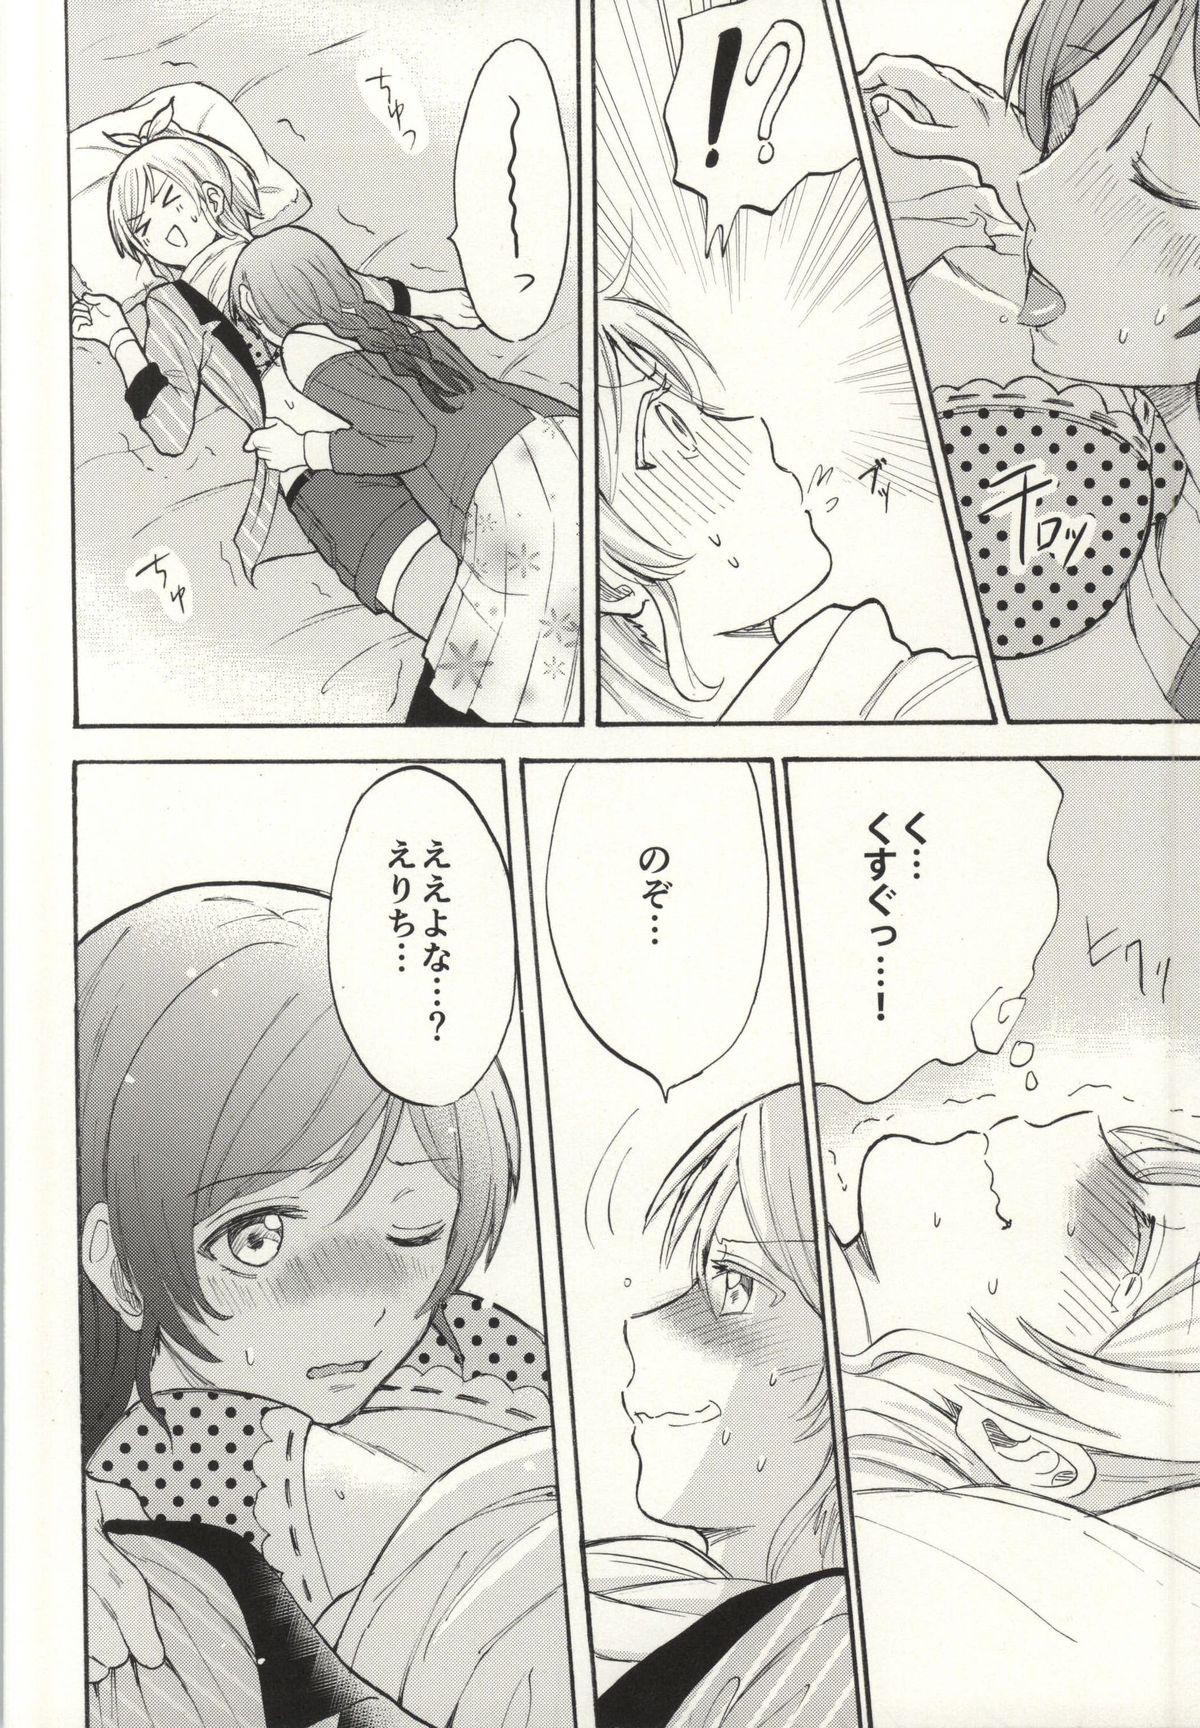 Eating Pussy Dame Dame! My Darling - Love live Stretch - Page 10